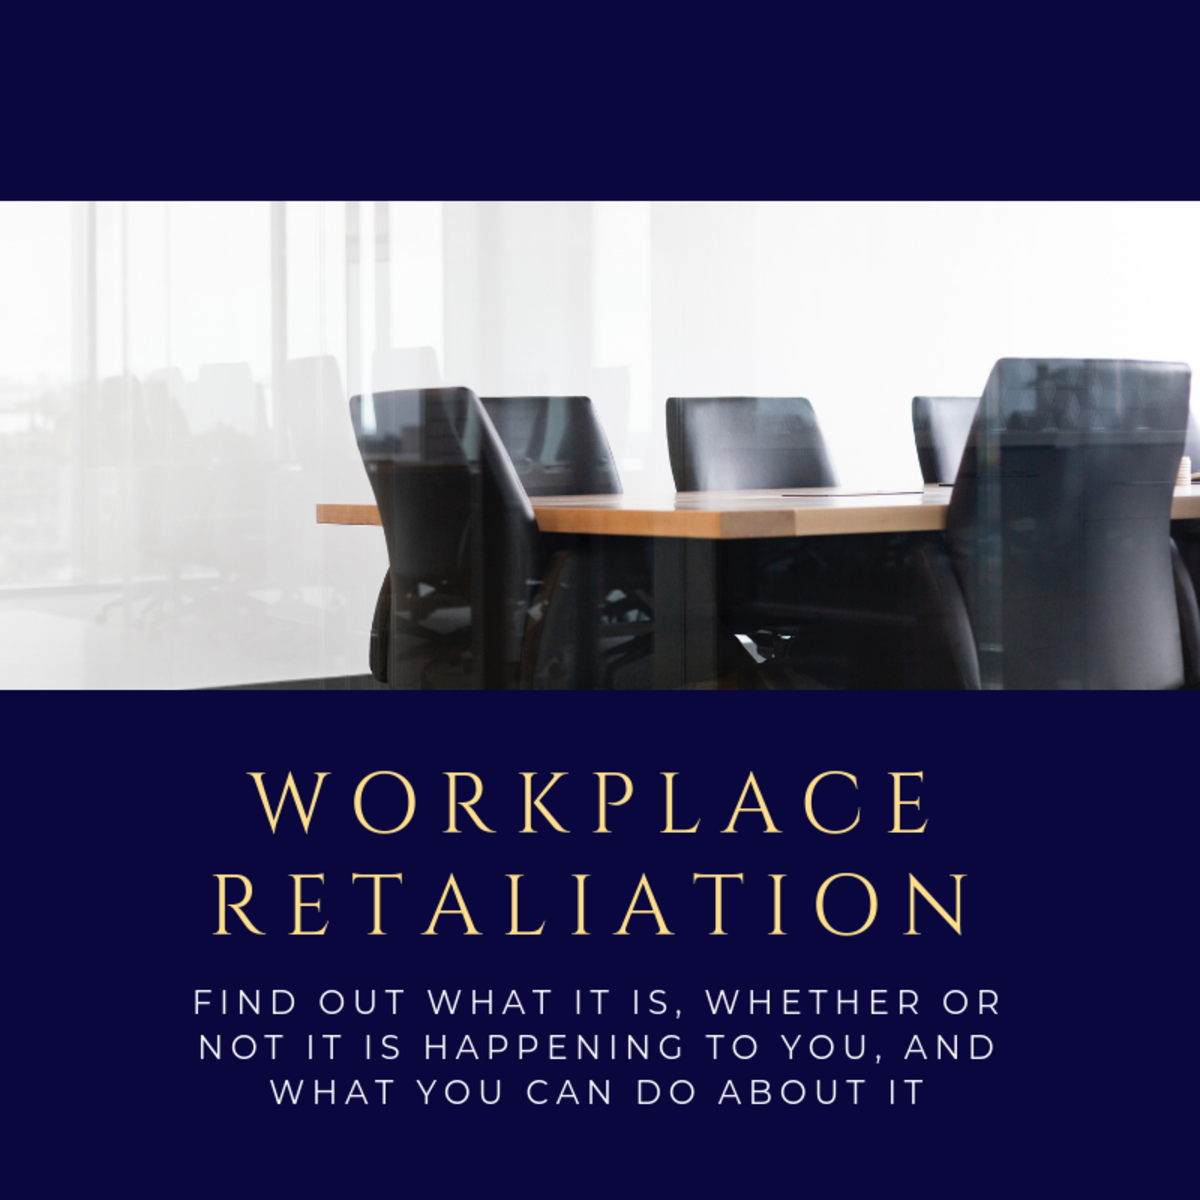 What Is Workplace Retaliation And Why Are Employers So Afraid Of